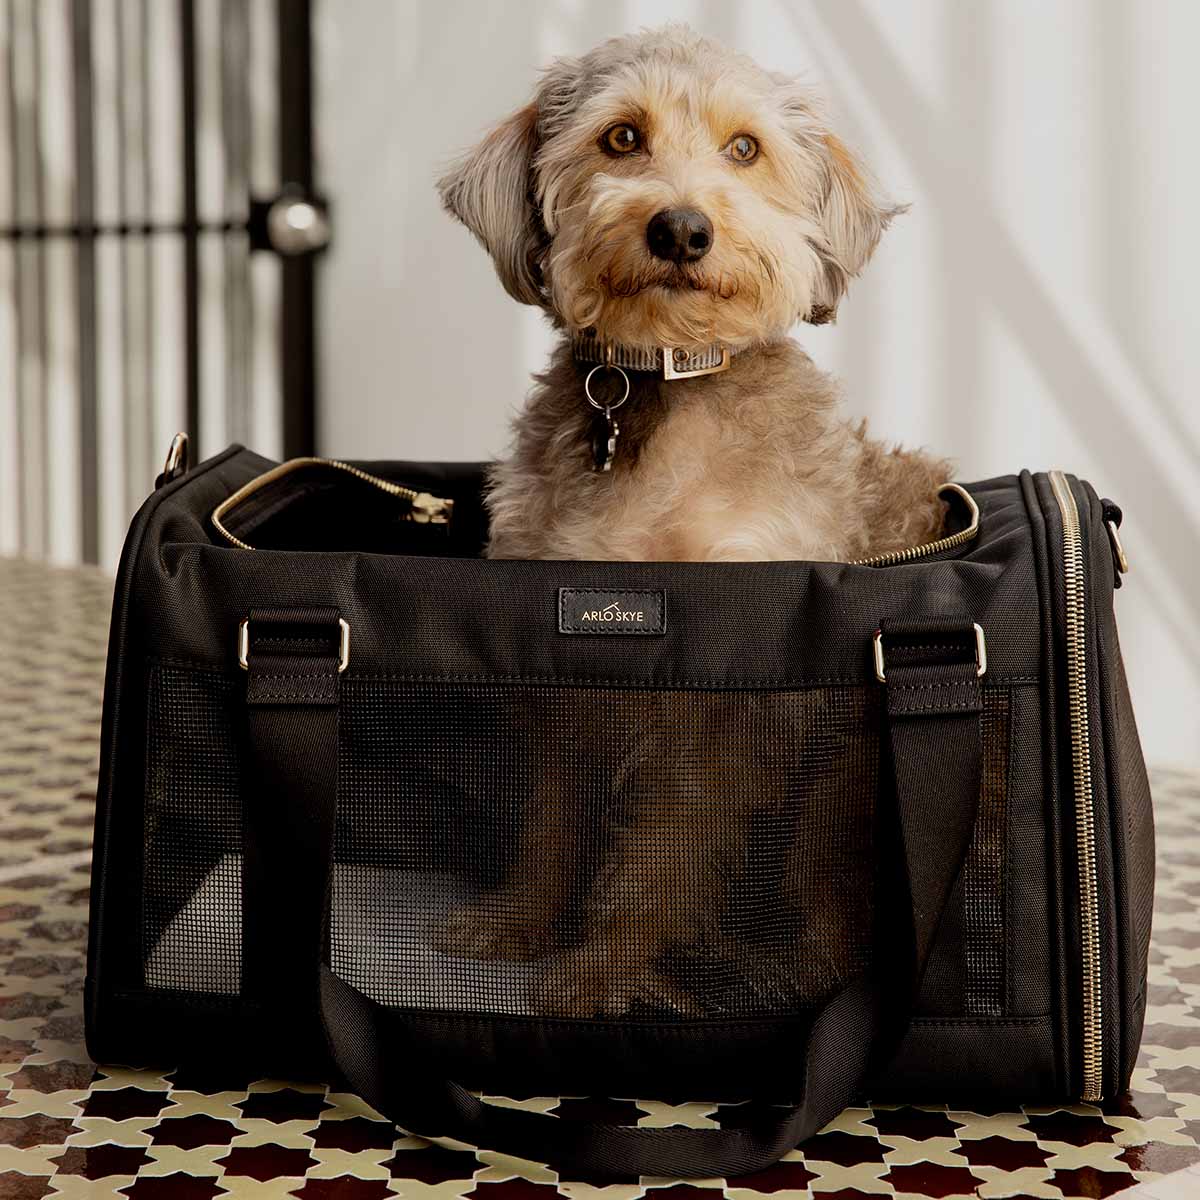 Front view of the pet carrier with dog inside